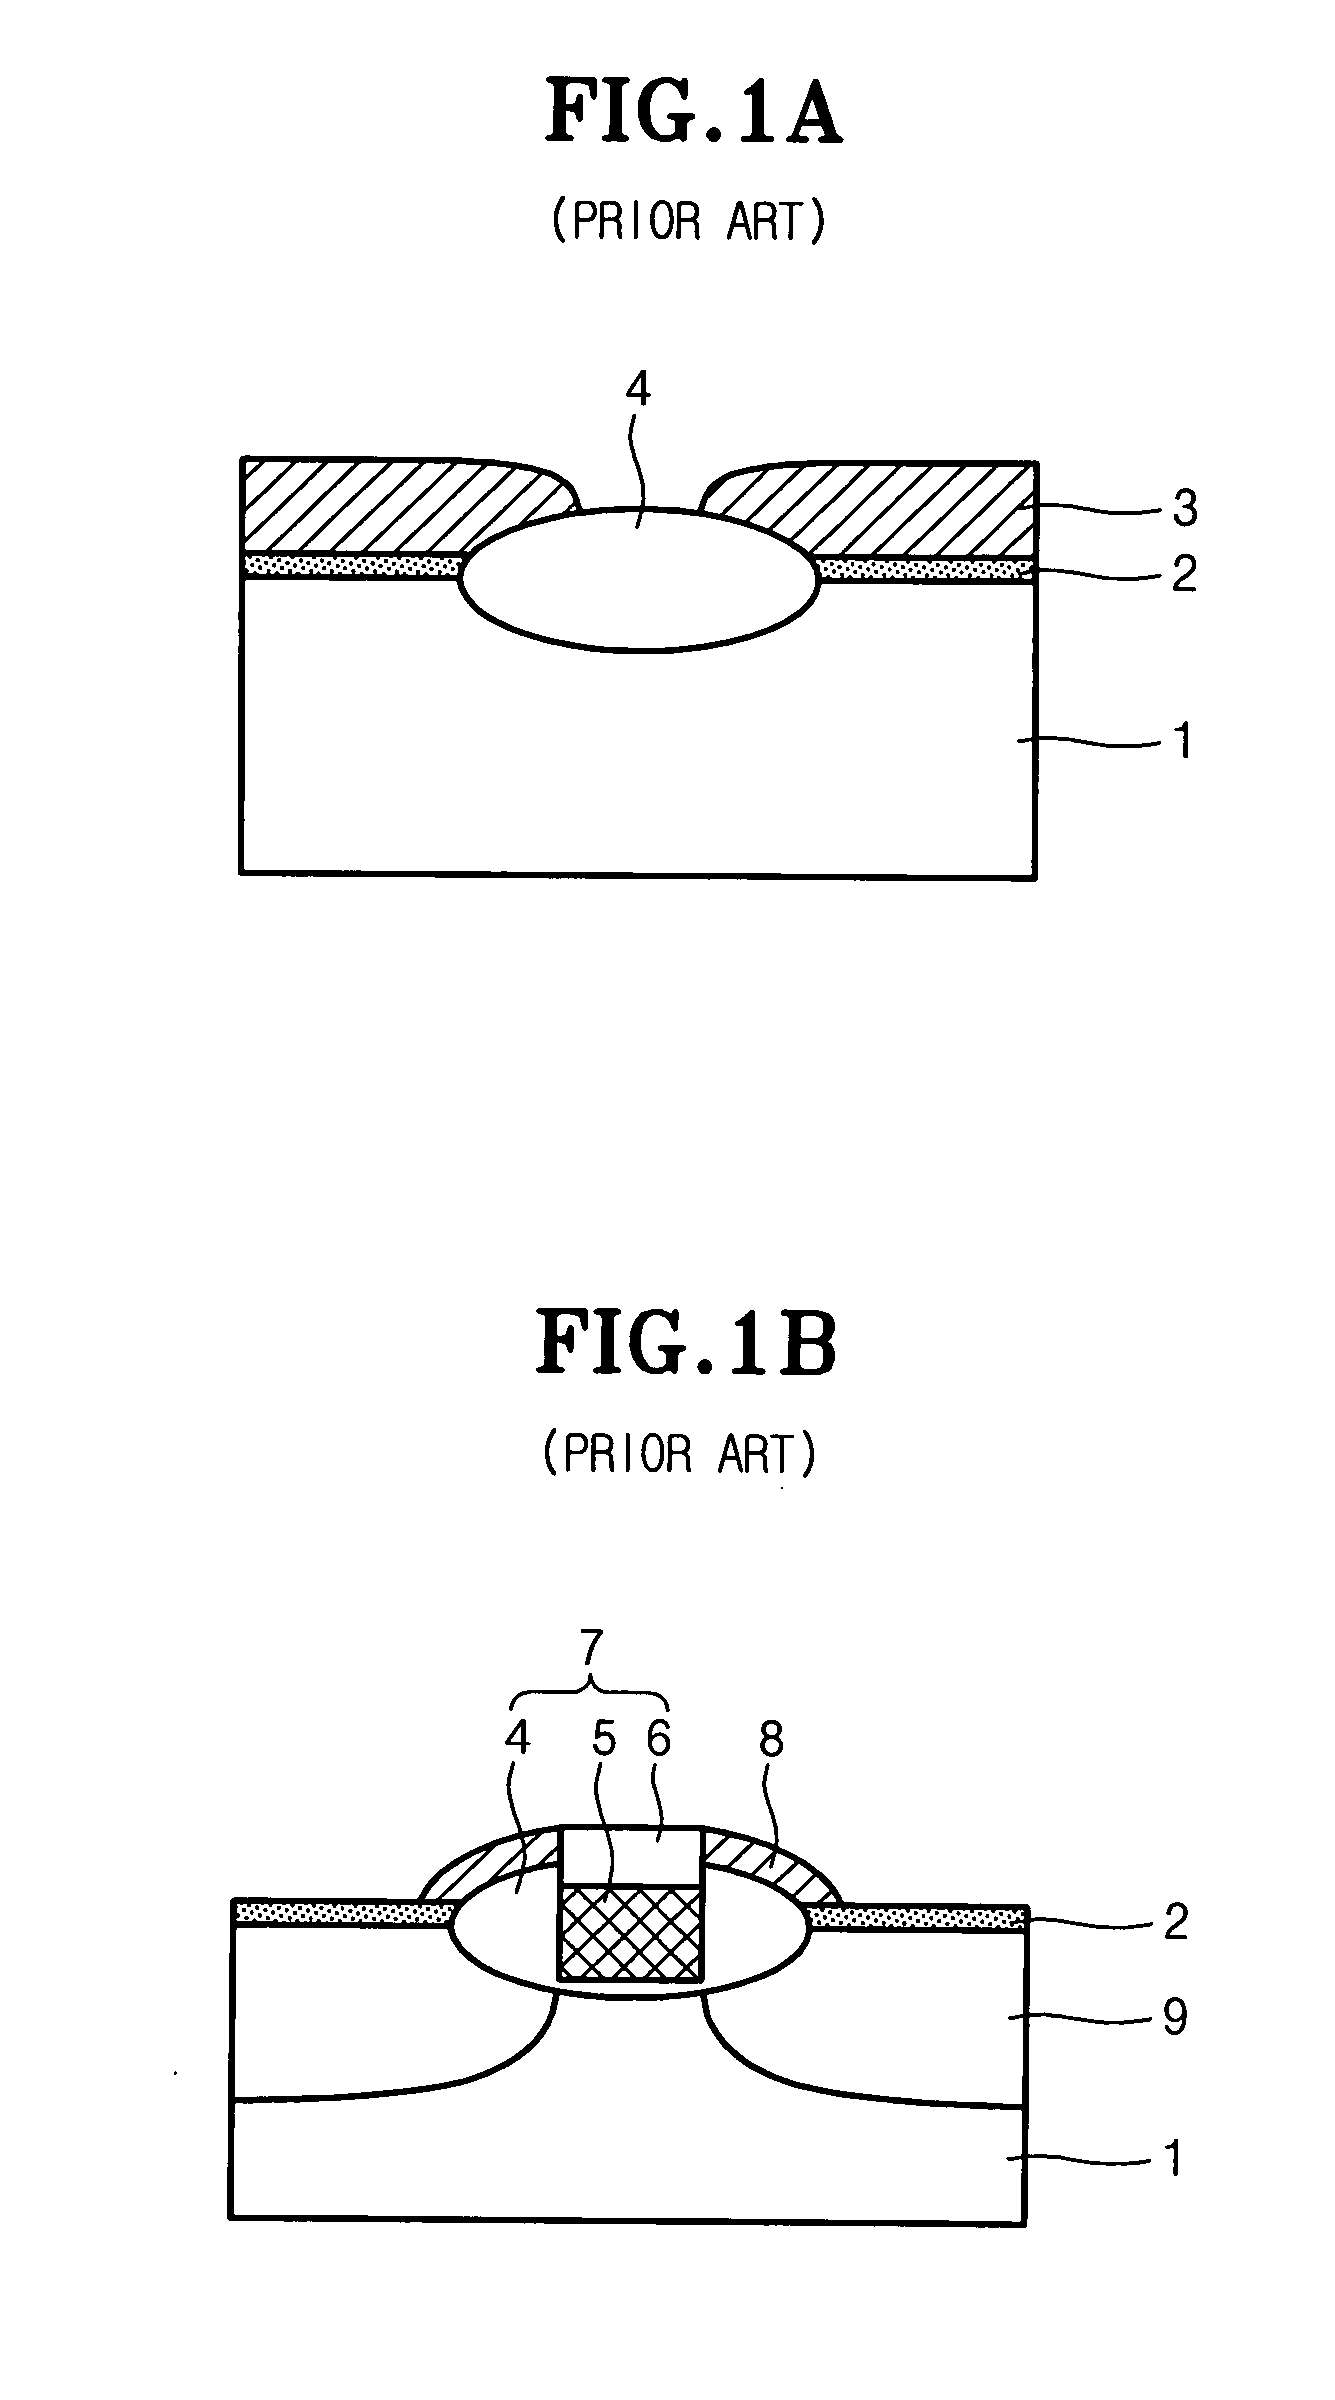 Semiconductor device having a recess gate for improved reliability